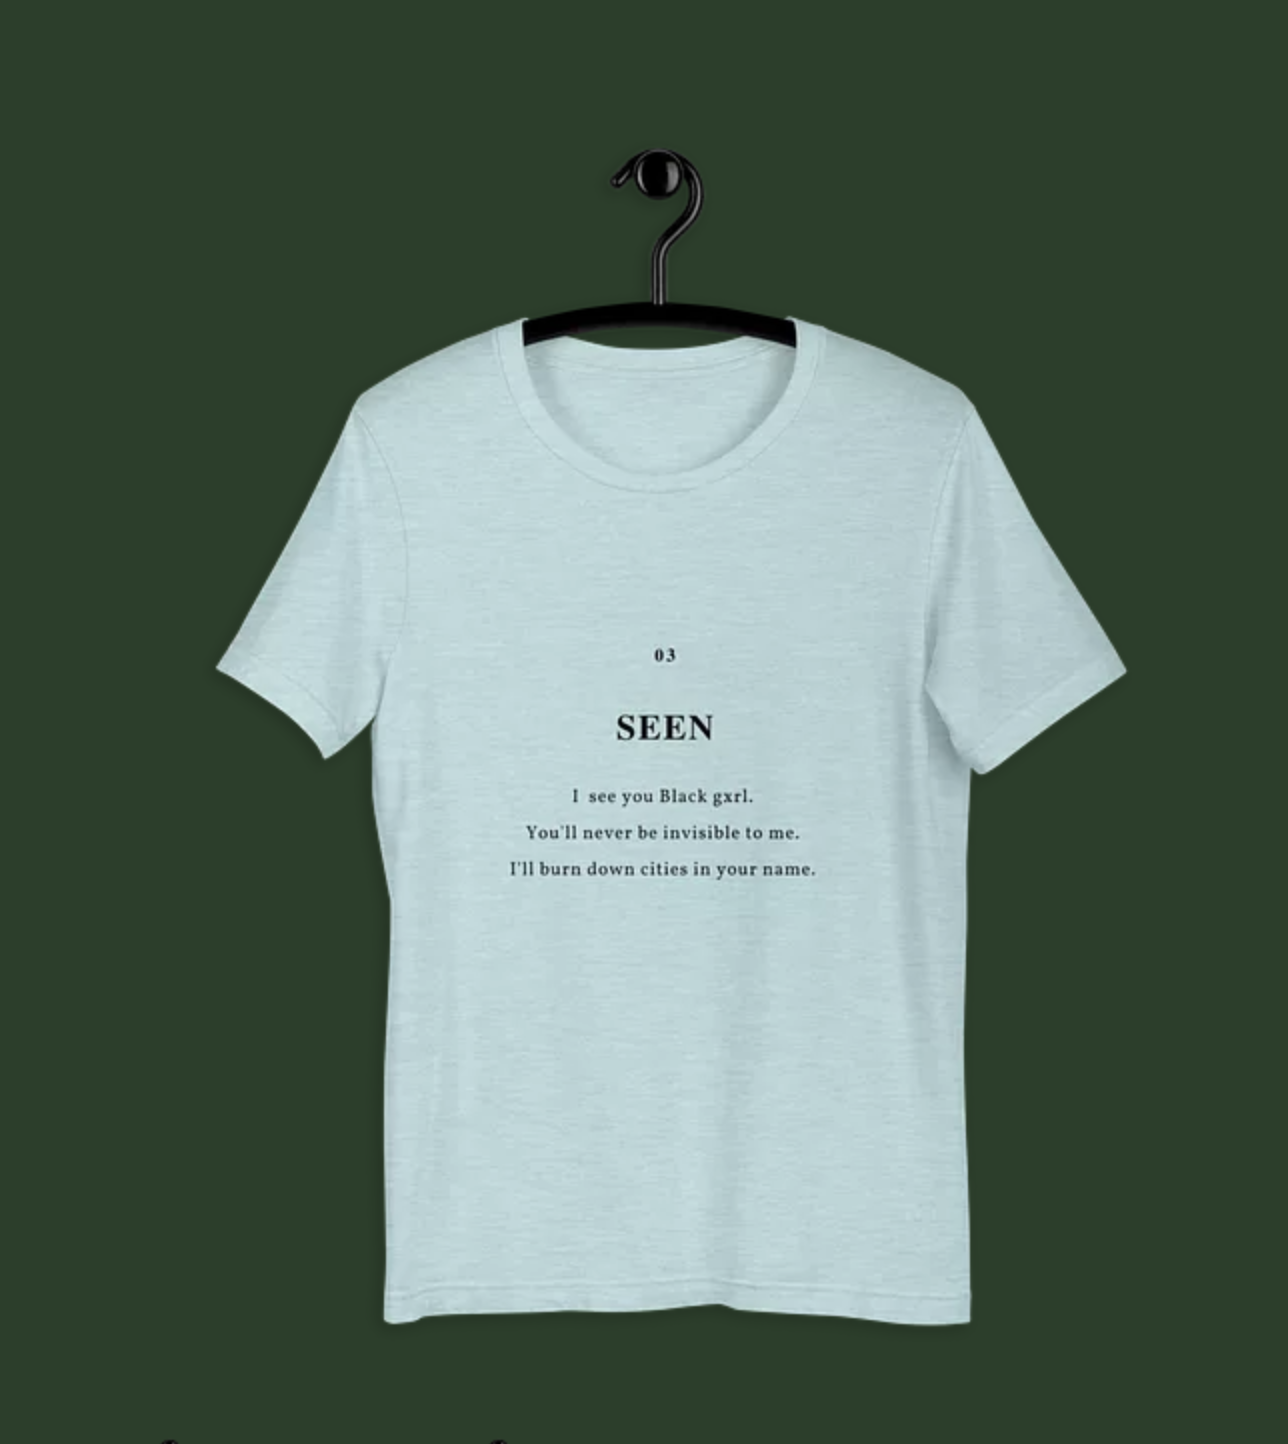 Simi’s “Seen” T-Shirts Are Raising Awareness About Violence Against Black Gxrls